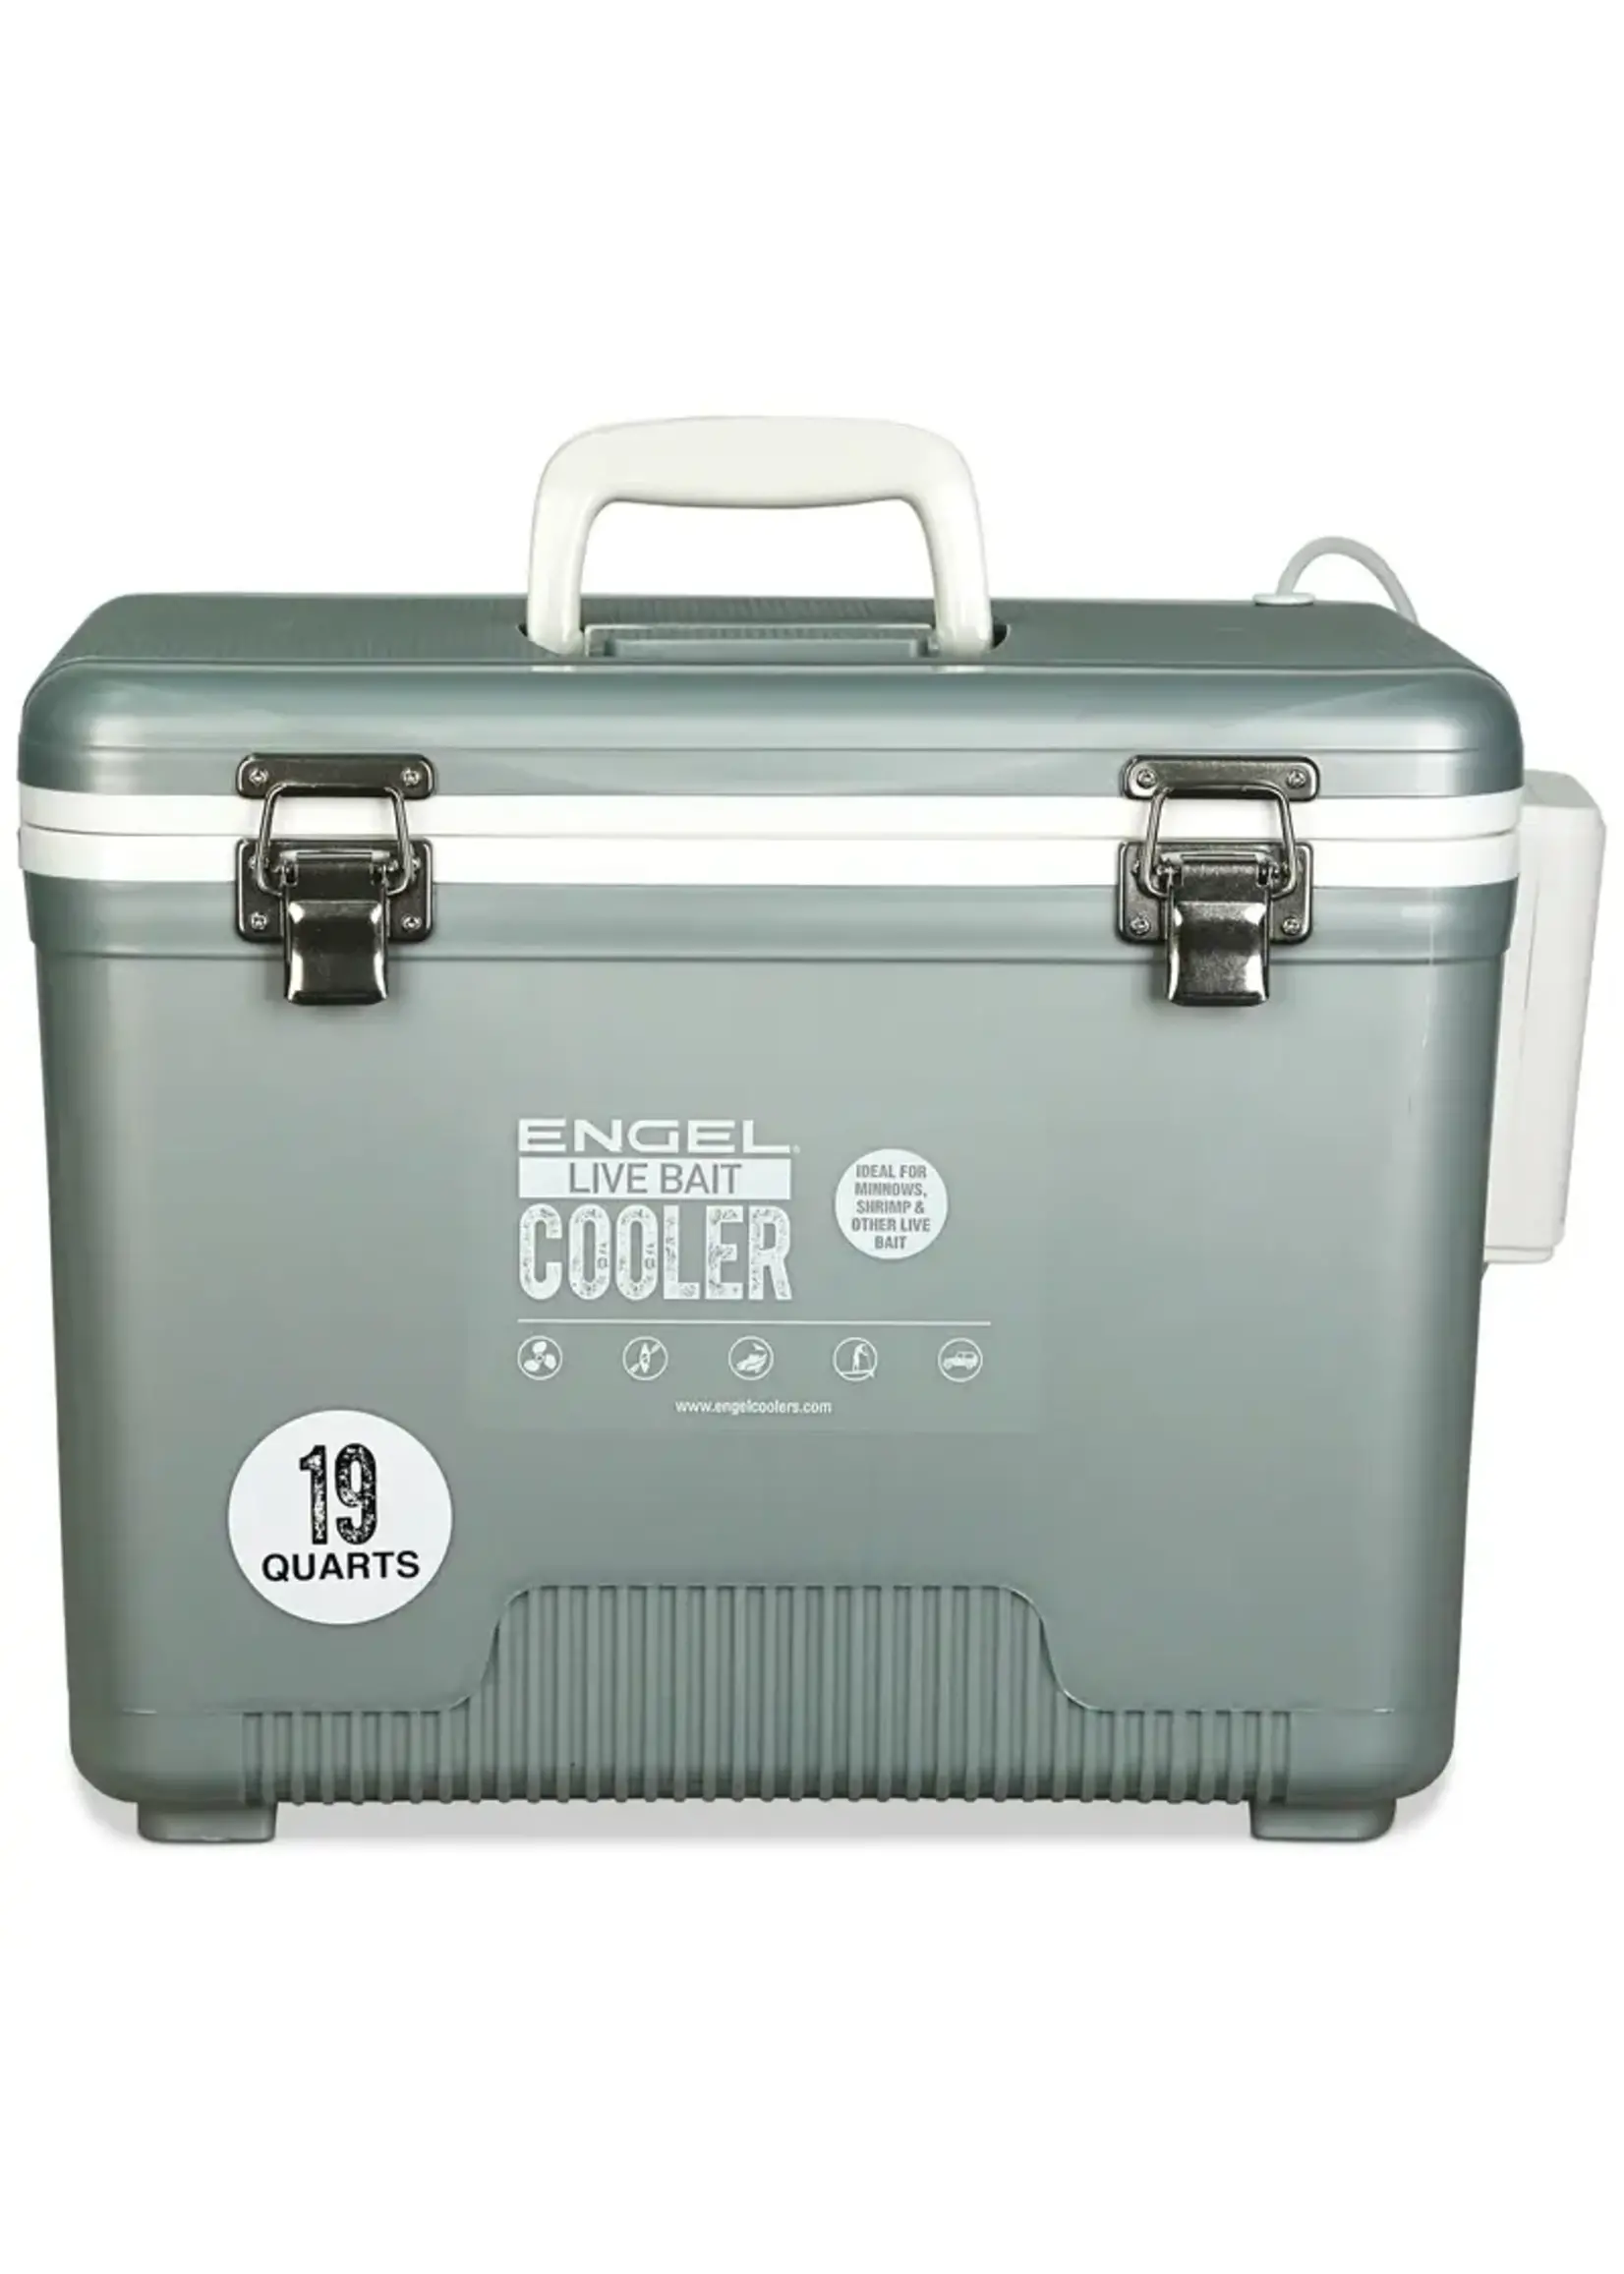 Engel Engel 19 Live Bait Pro Cooler with AP3 Aerator - Silver/White